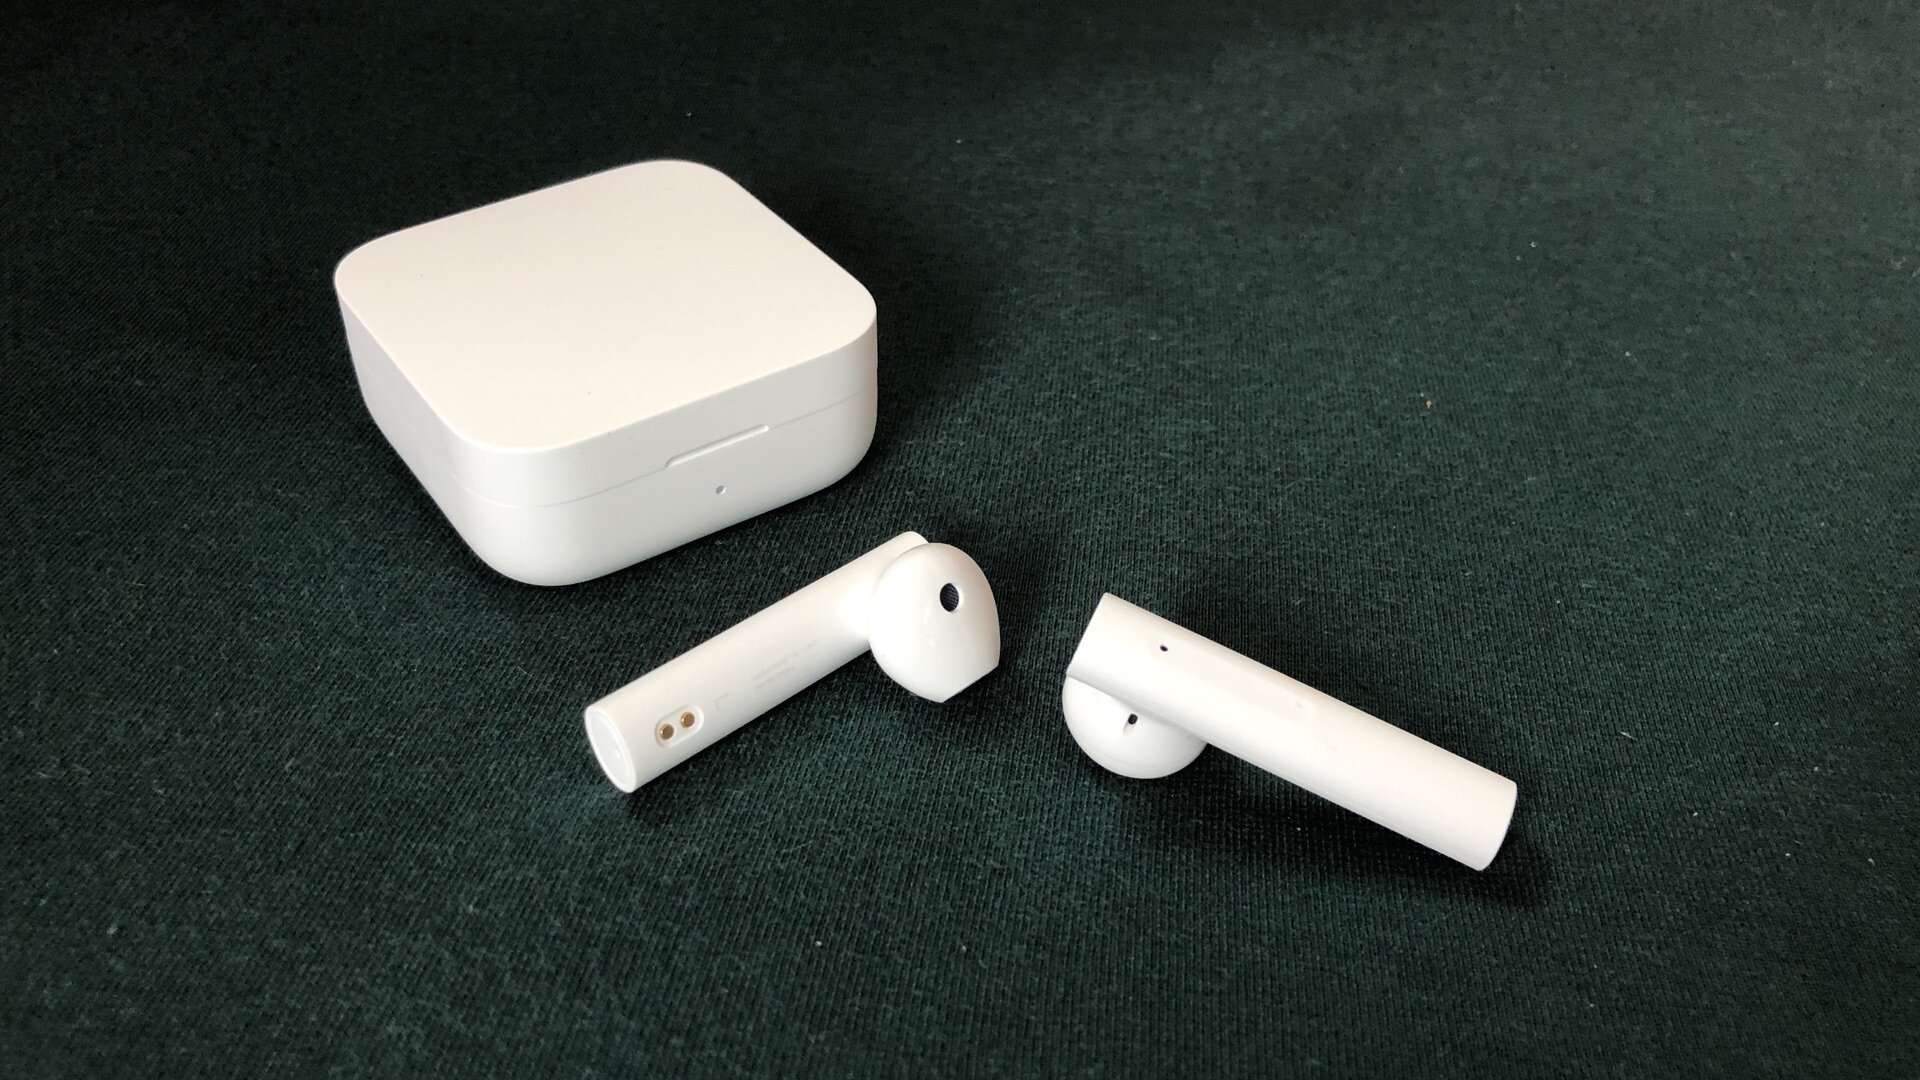 Xiaomi Redmi AirDots: The AirPods alternative that cost less than US$15 -   News